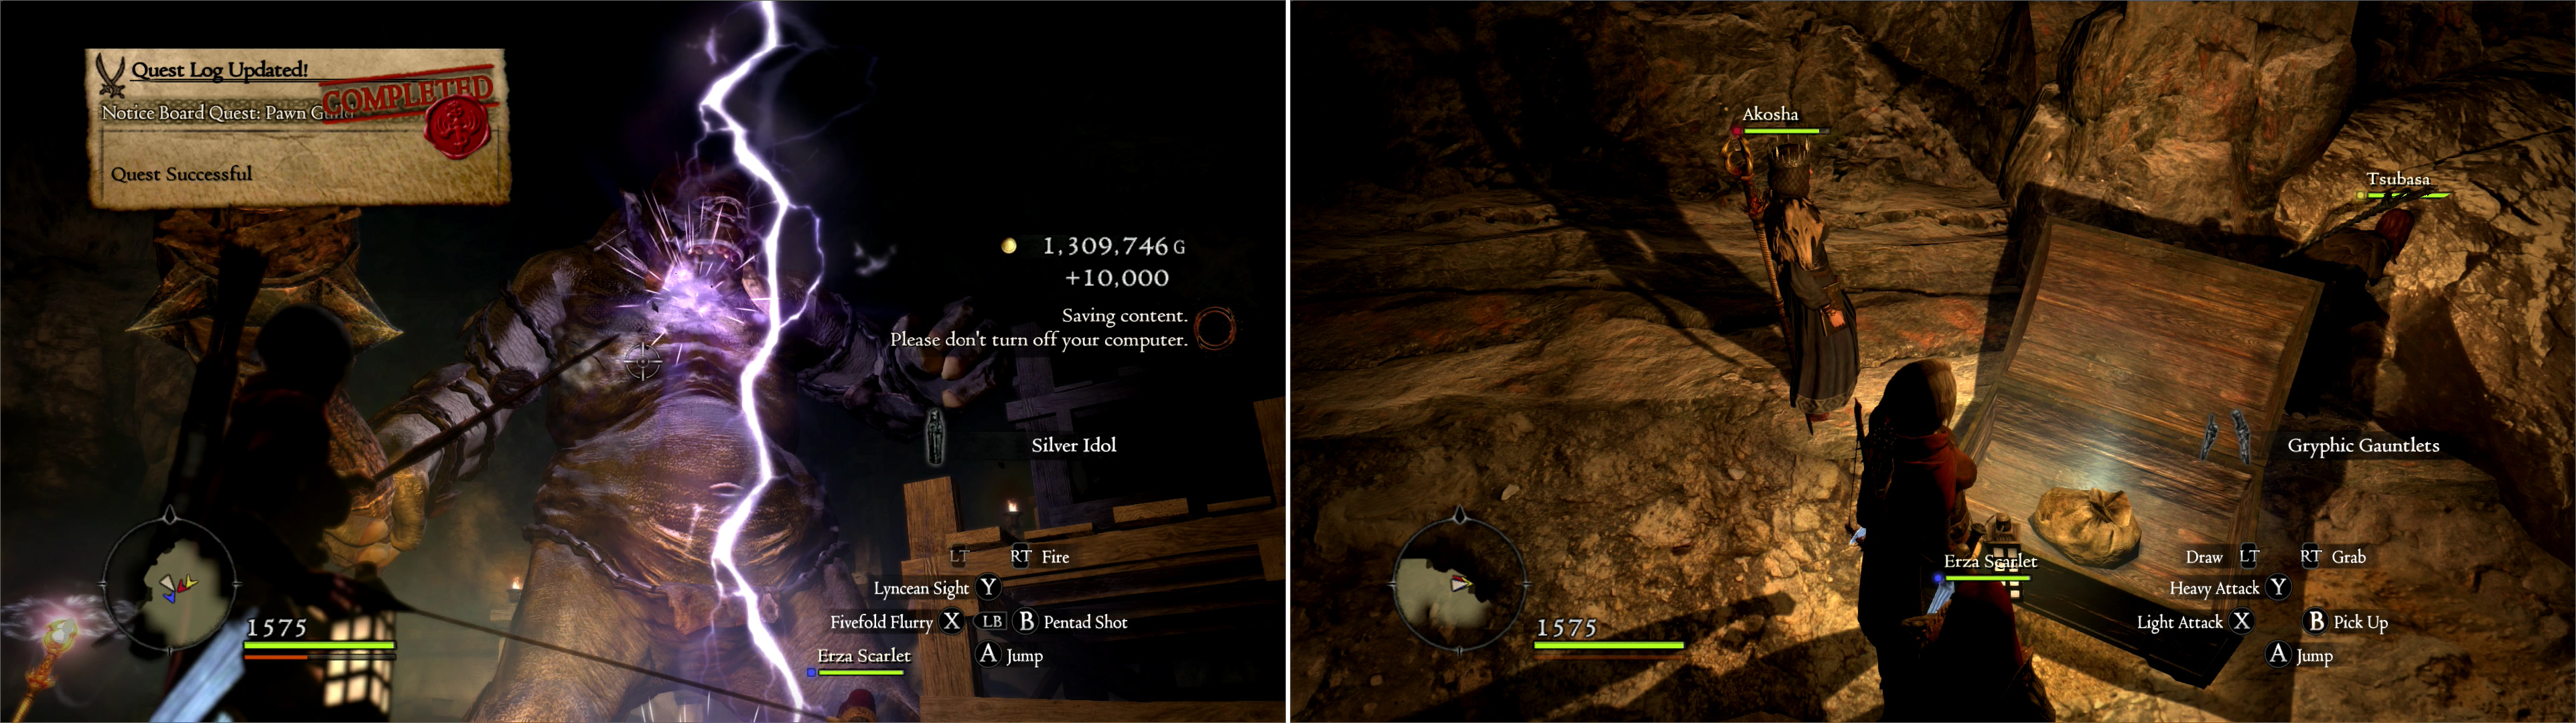 Kill the Cyclops in the Frontier Cavern to obtain the Silver Idol (left), then score several treasure chests lining the arena (right).